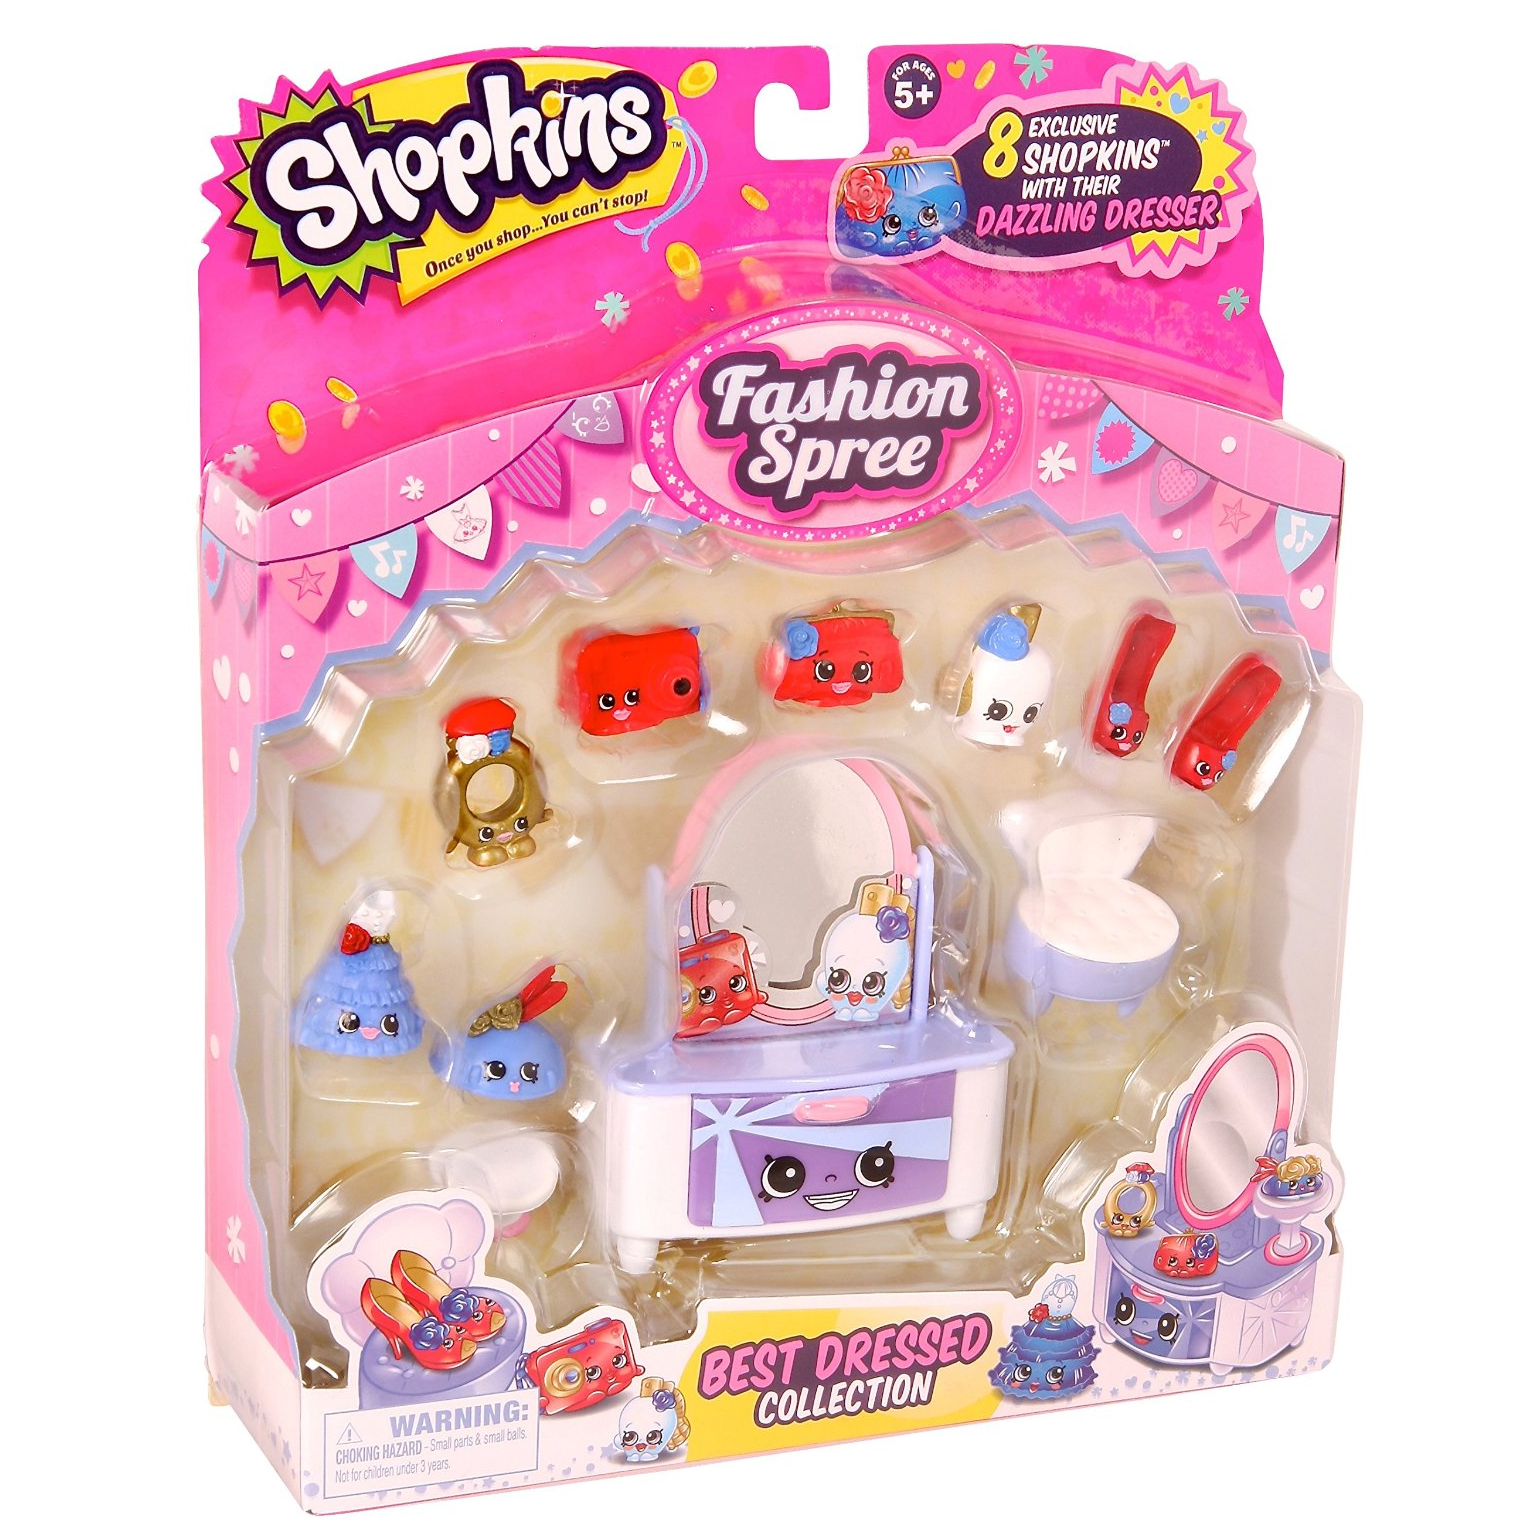 Shopkins S3 Best Dressed Fashion Pack Only $8.66 on Amazon!